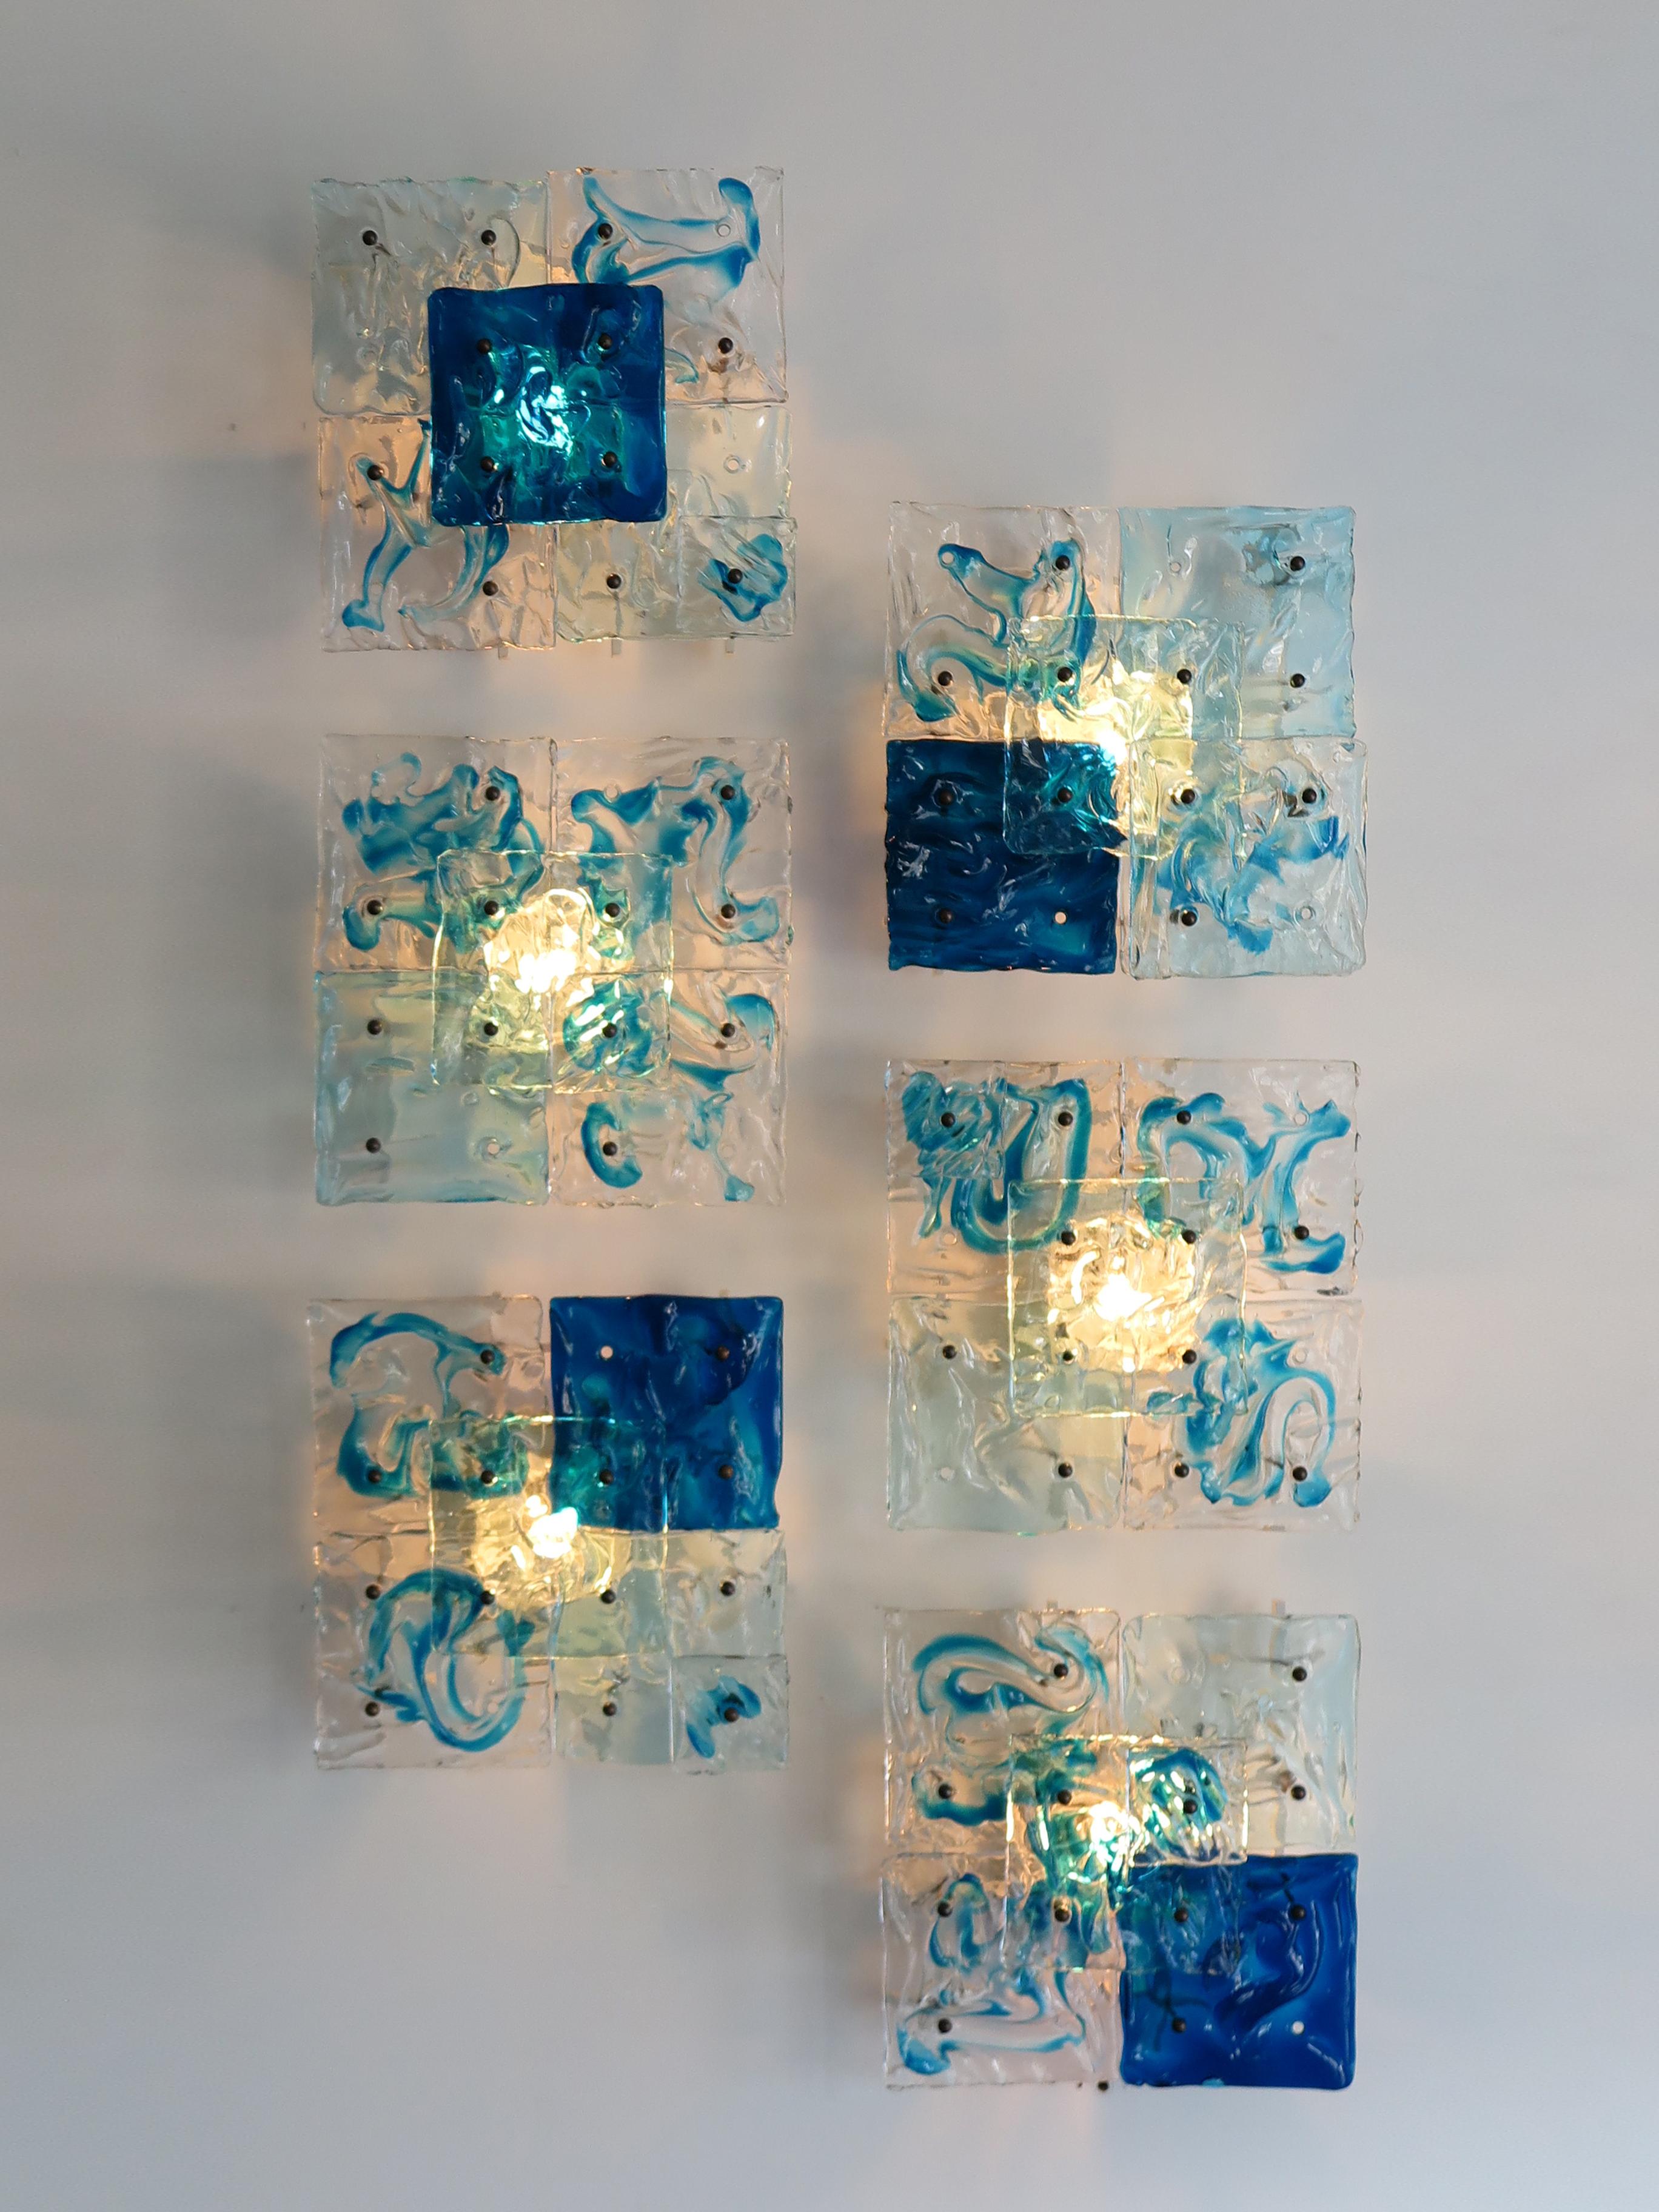 Set of amazing and very rare and luxury Italian wall lights or sconces designed by Toni Zuccheri and produced by Venini Murano, model Patchwork, hot-worked transparent glass, painted metal frame and brass details, 1970s.
Venini Murano brand